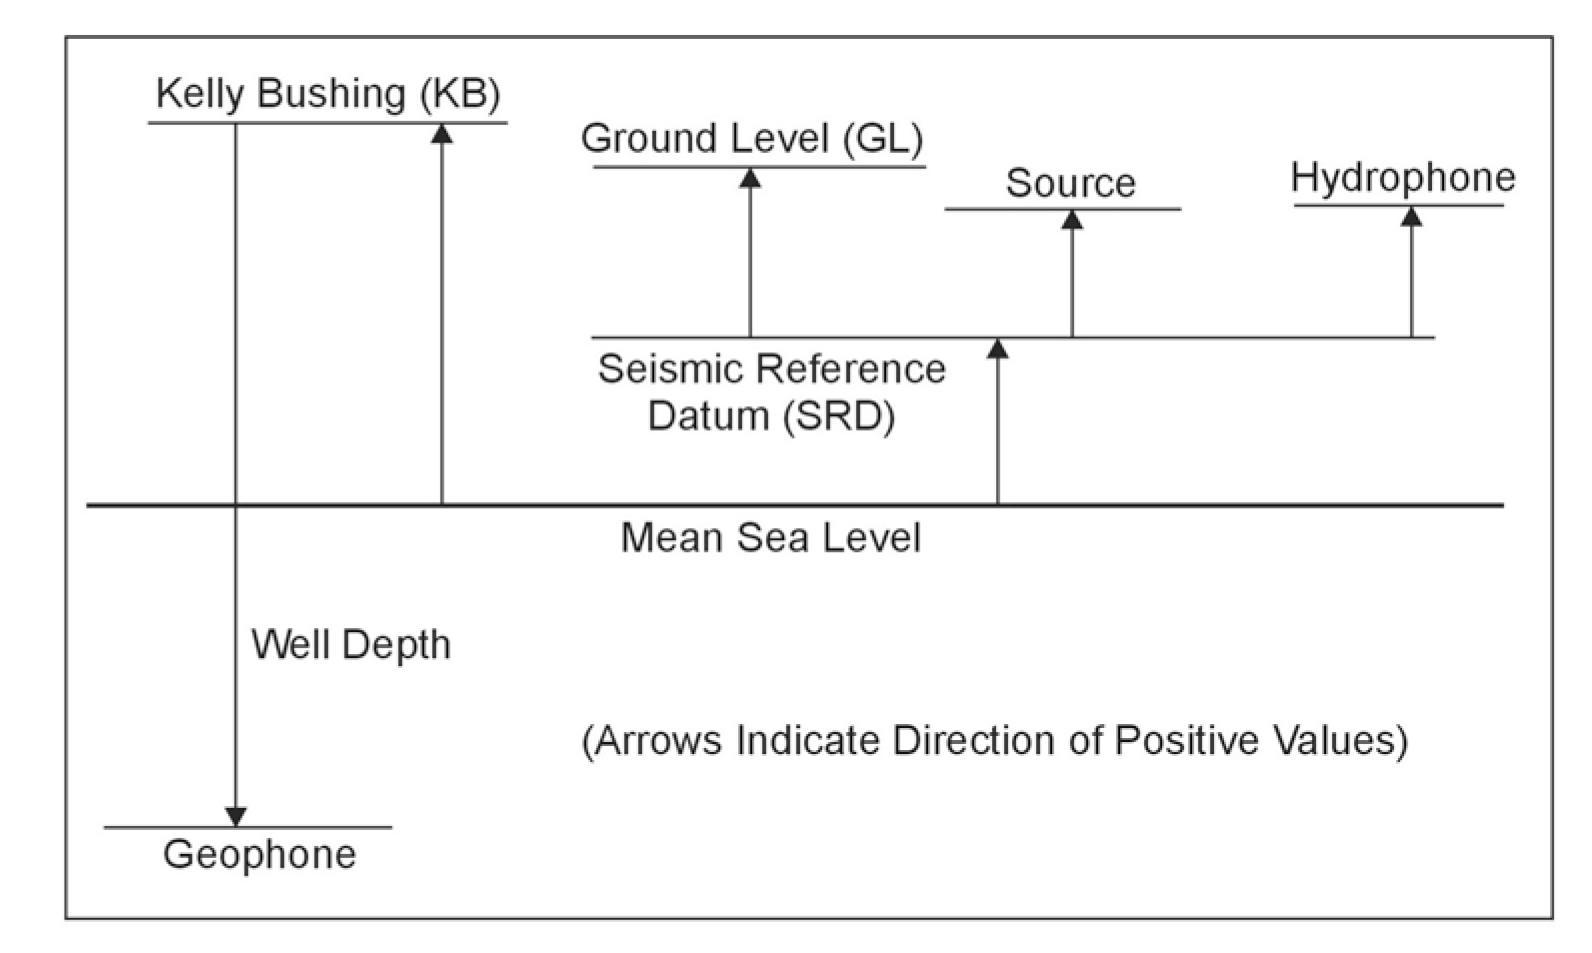 Summary of possible corrections to tie velocity survey to surface seismic data.